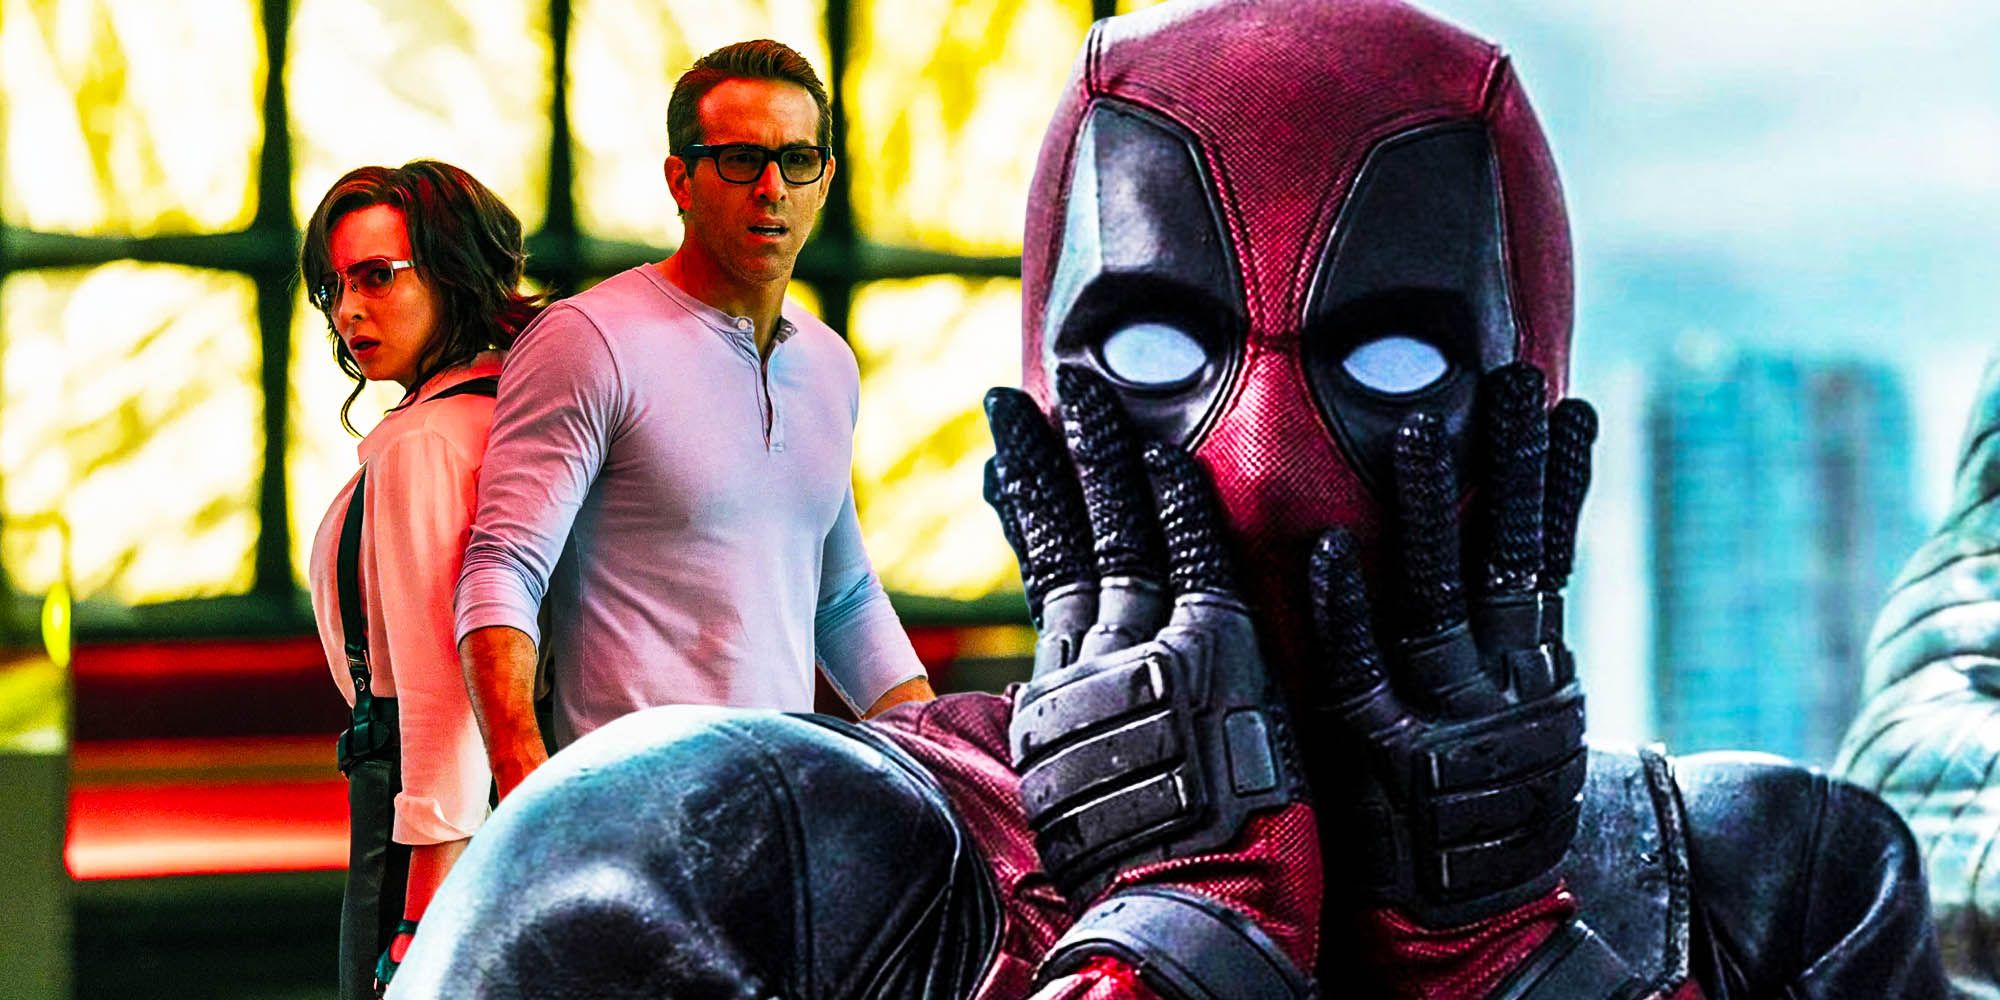 MCU Deadpool 3 Movie Officially Finds Its Director